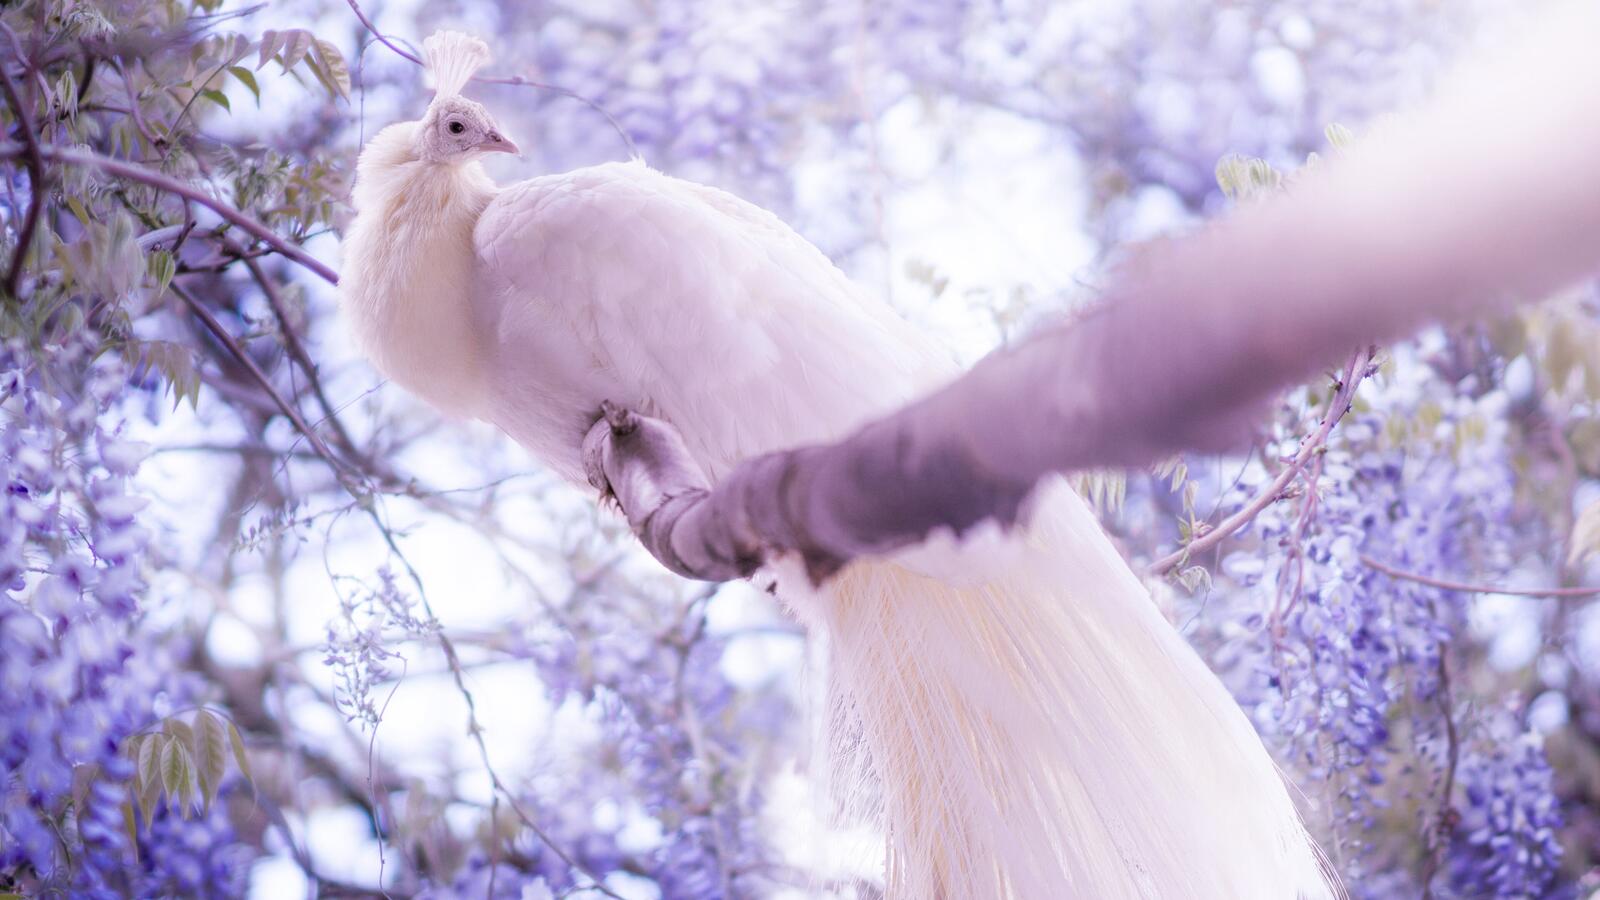 Wallpapers wallpaper white peacock majestic feather on the desktop